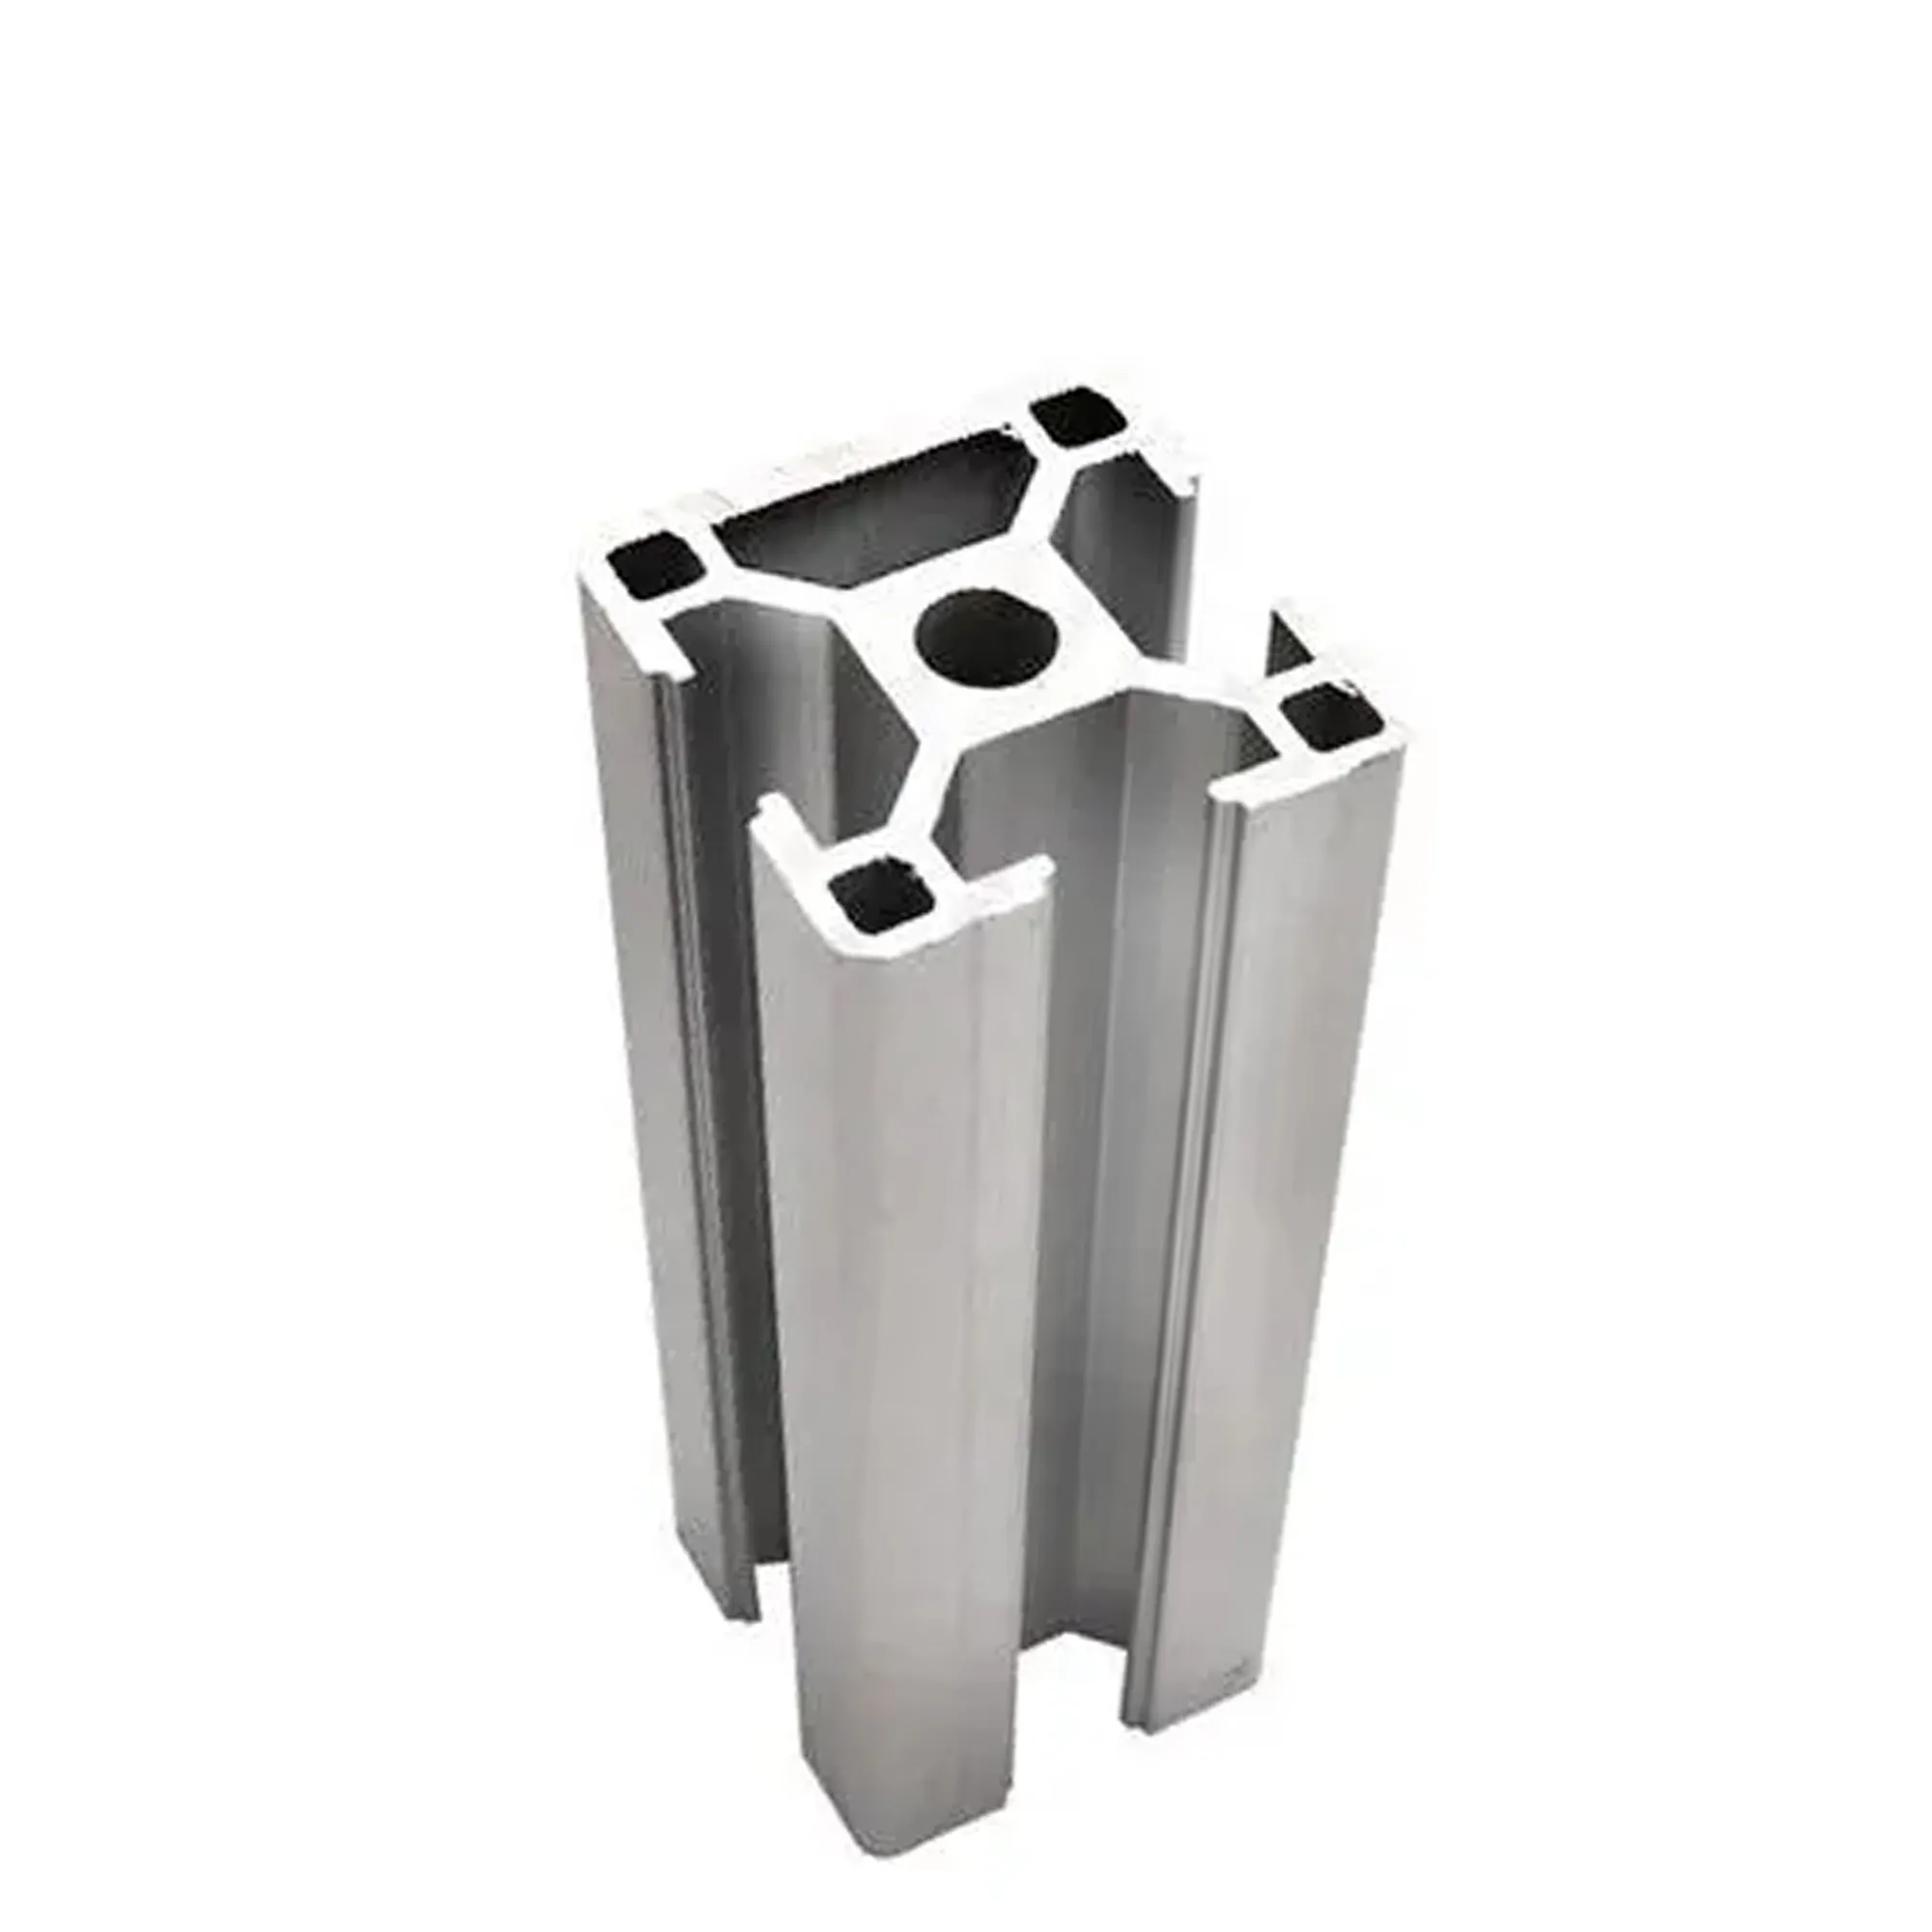 Custom Industry T-Slot Extruded Aluminum Profile For Fasteners Frame